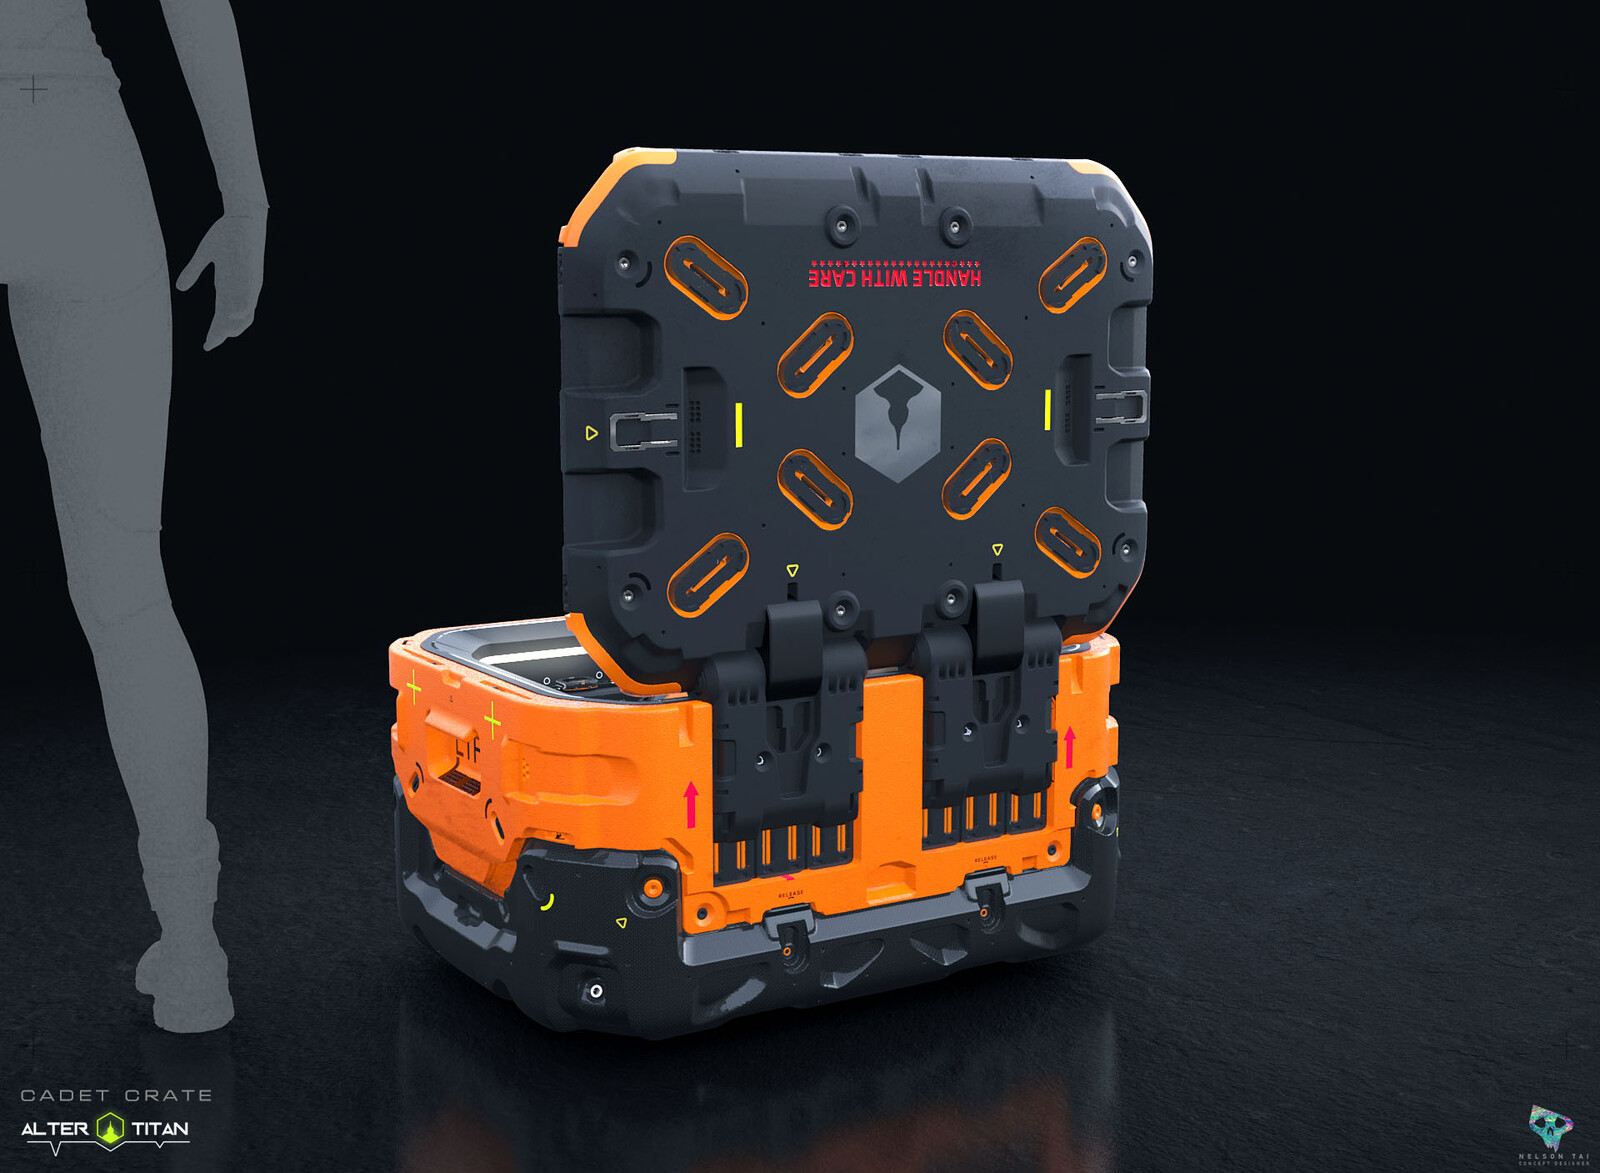 Designing the crate's top was a lot of fun!